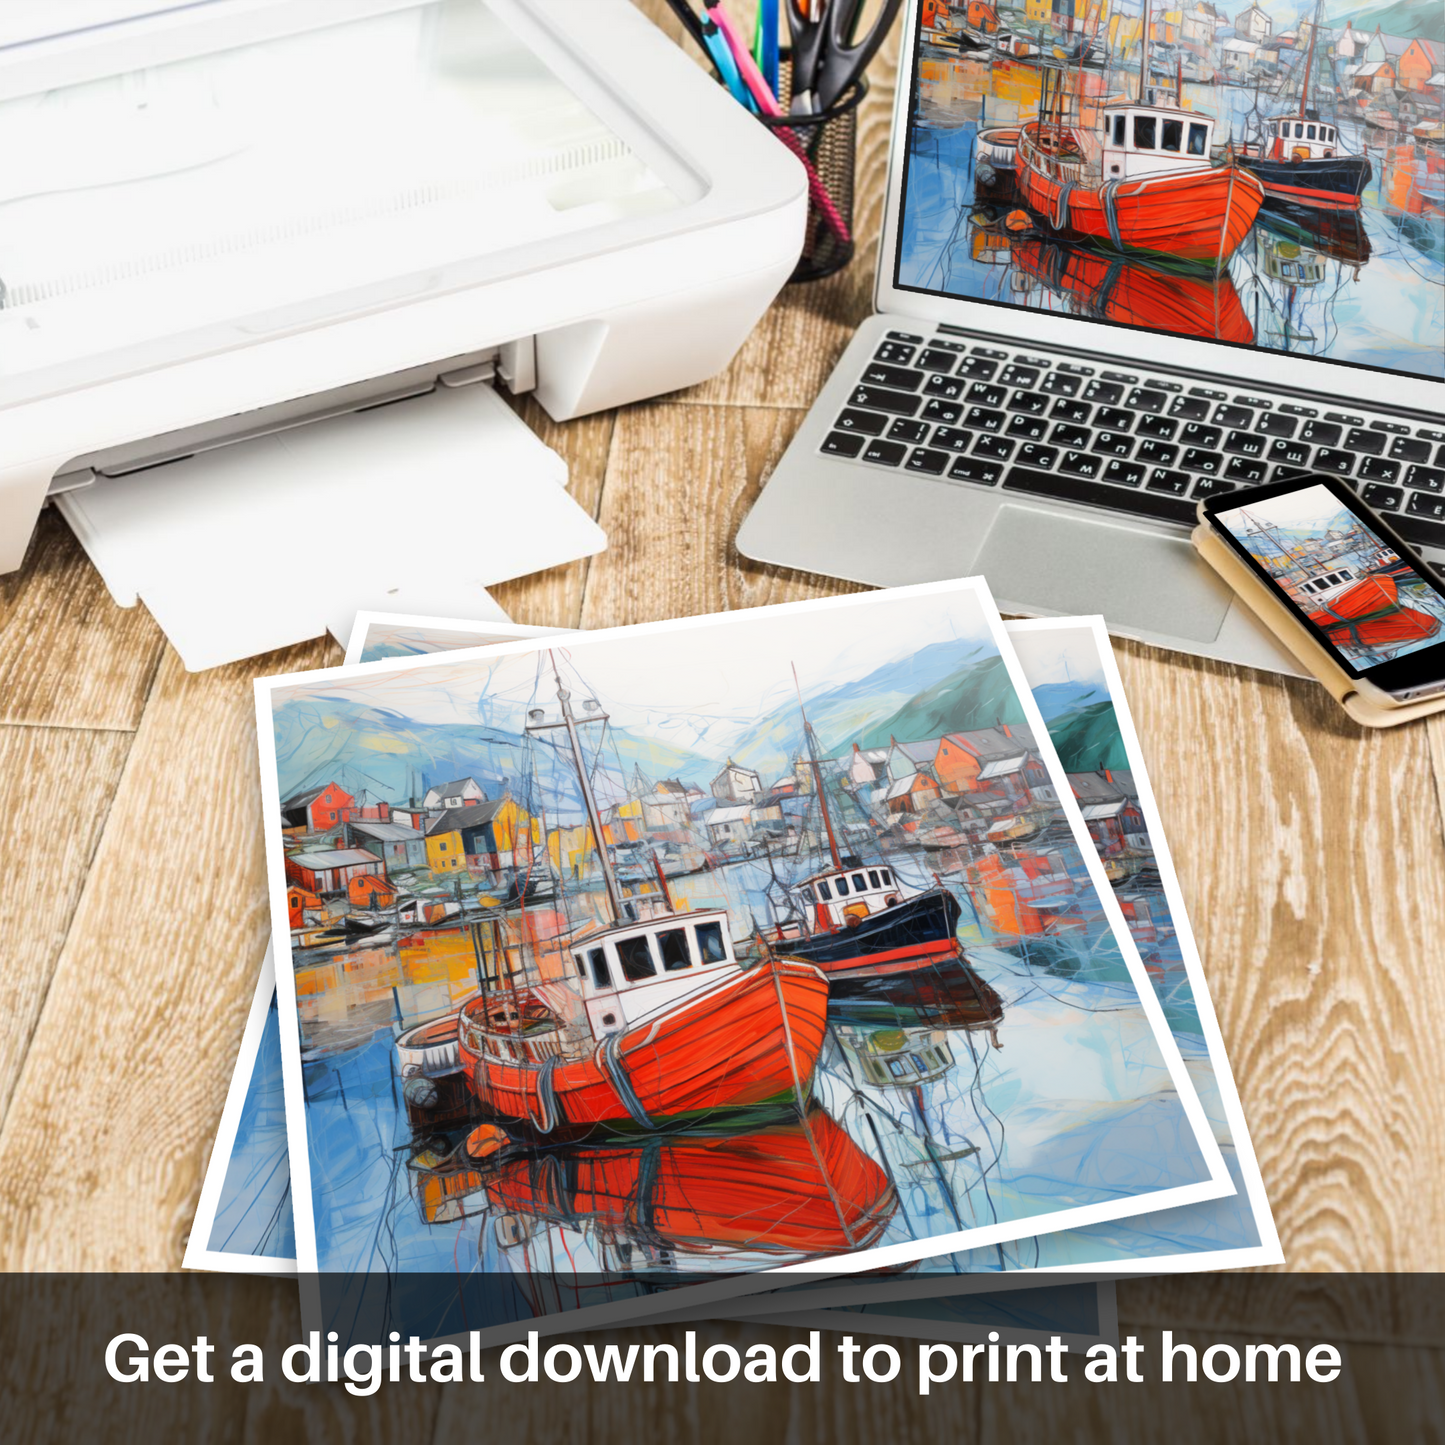 Downloadable and printable picture of Ullapool Harbour